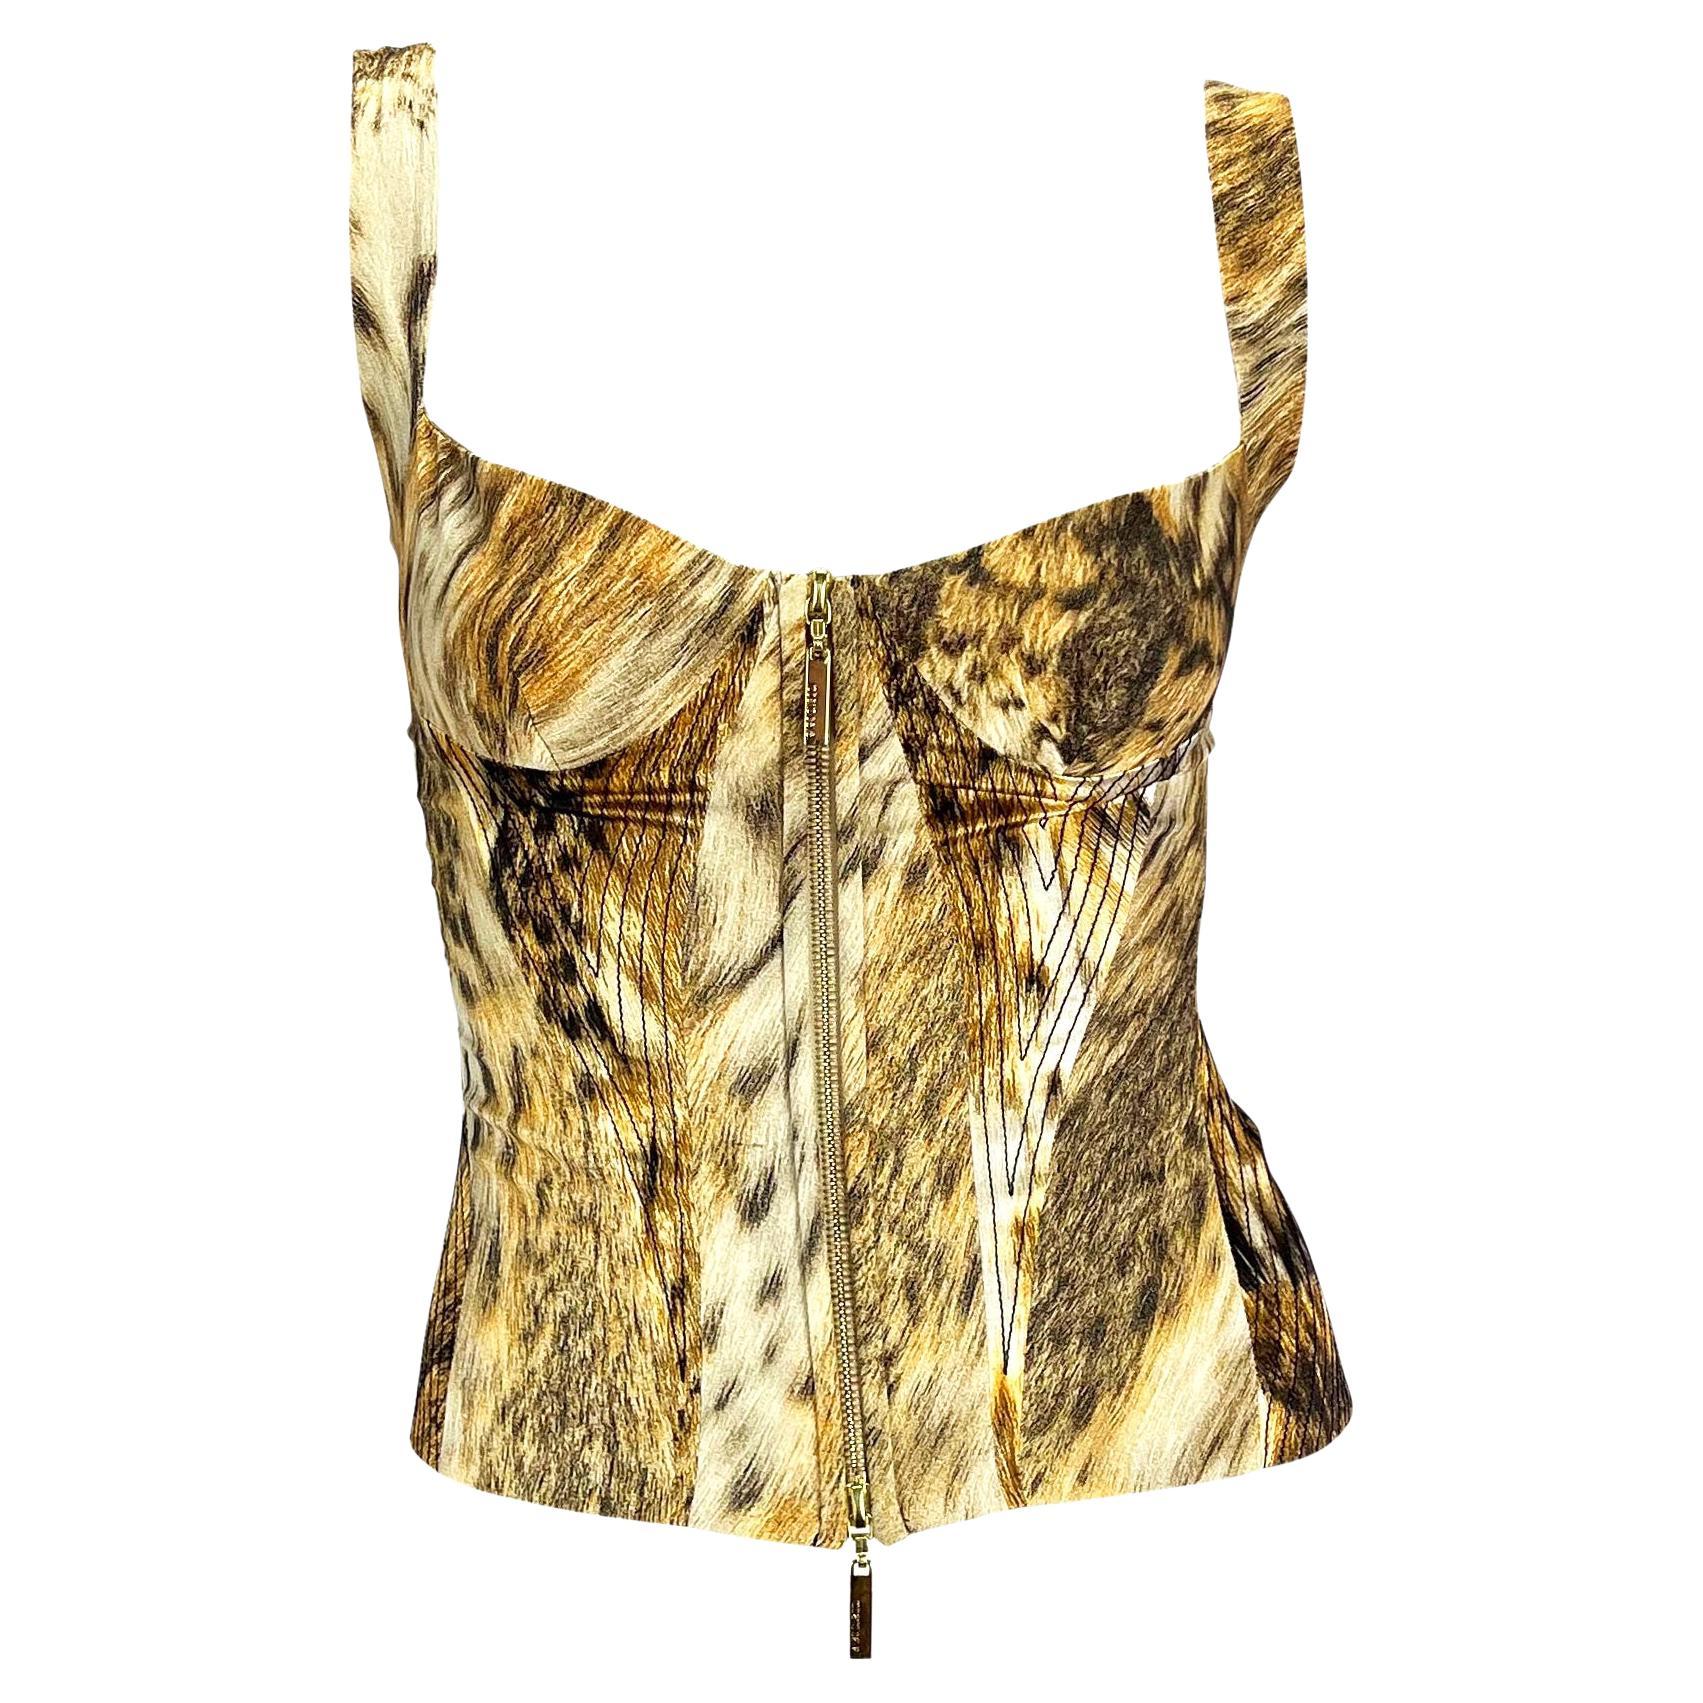 Presenting a beautiful Roberto Cavalli leopard animal print bustier corset top. From 2003, this animal print top features a zip closure at the front, square neckline, adjustable corset tie at the back, and embroidered accents at the sides. It does